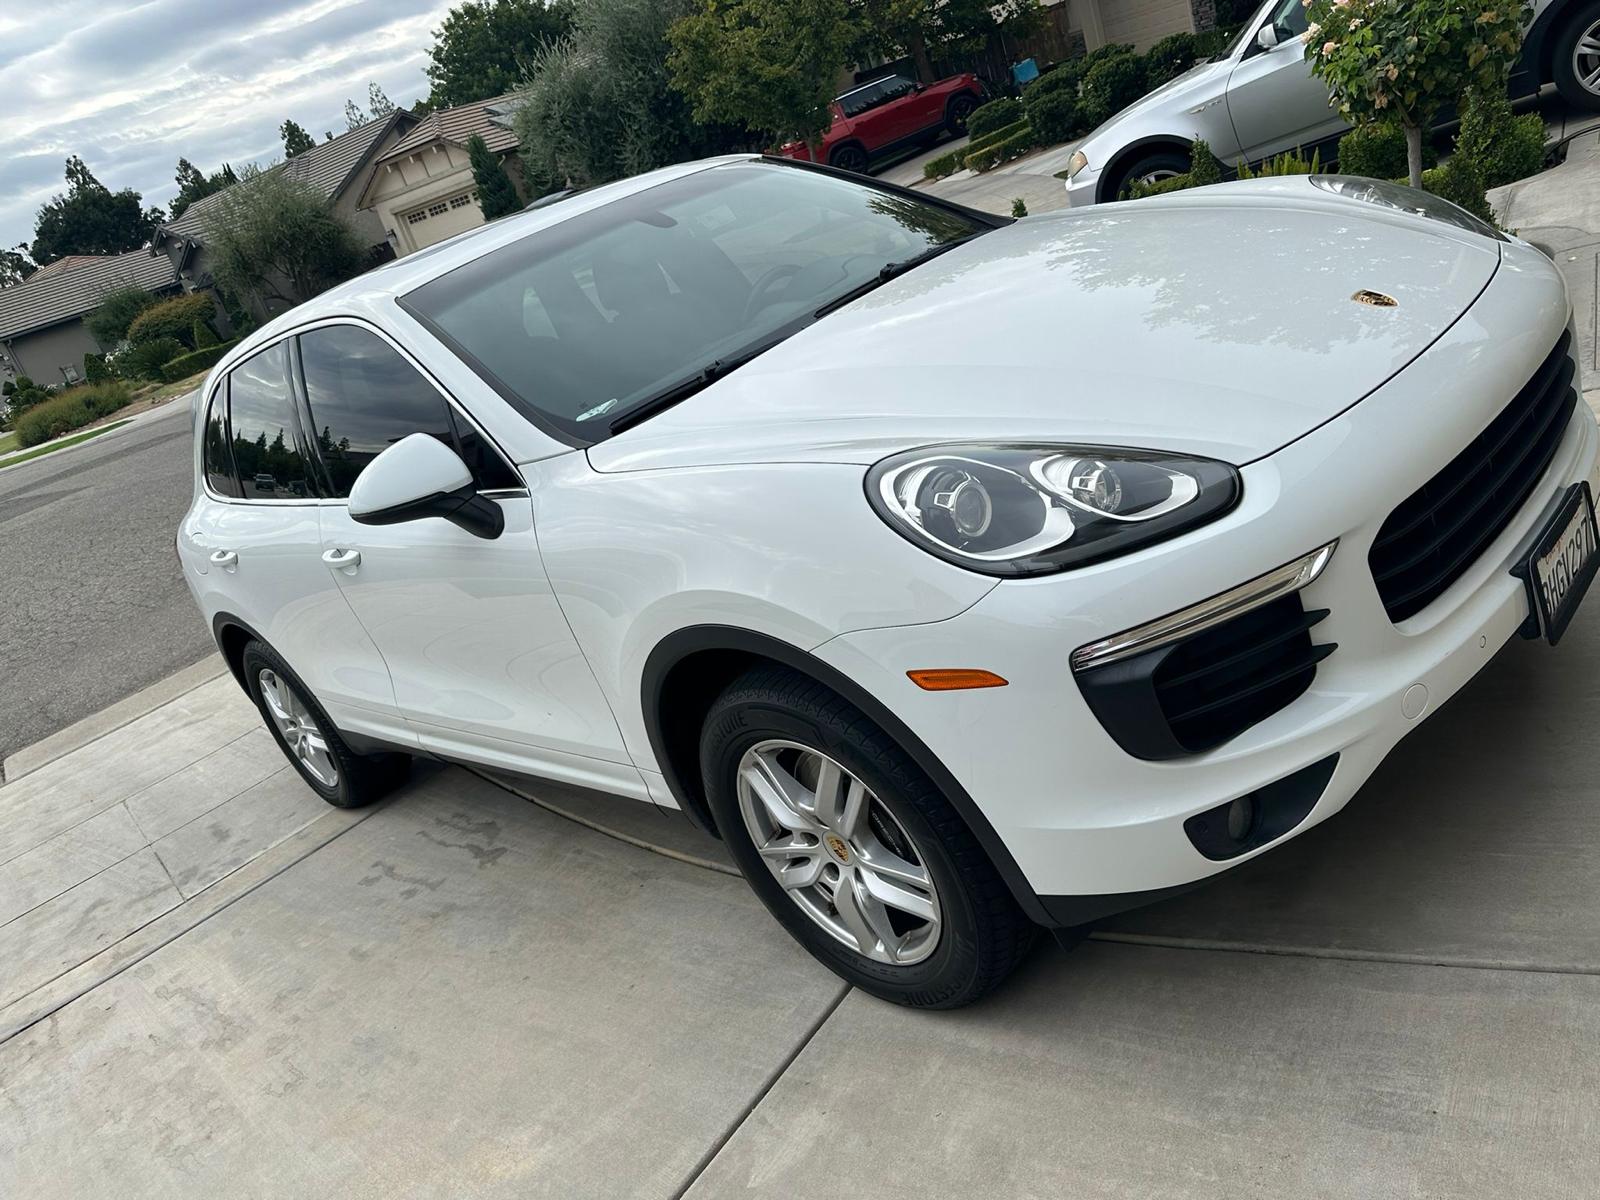 The pre-owned 2019 Porsche Cayenne in Biscay Blue Metallic available at  Porsche Fresno 🔥 Mileage: 21,824 Price: $63,999 . Want to lea